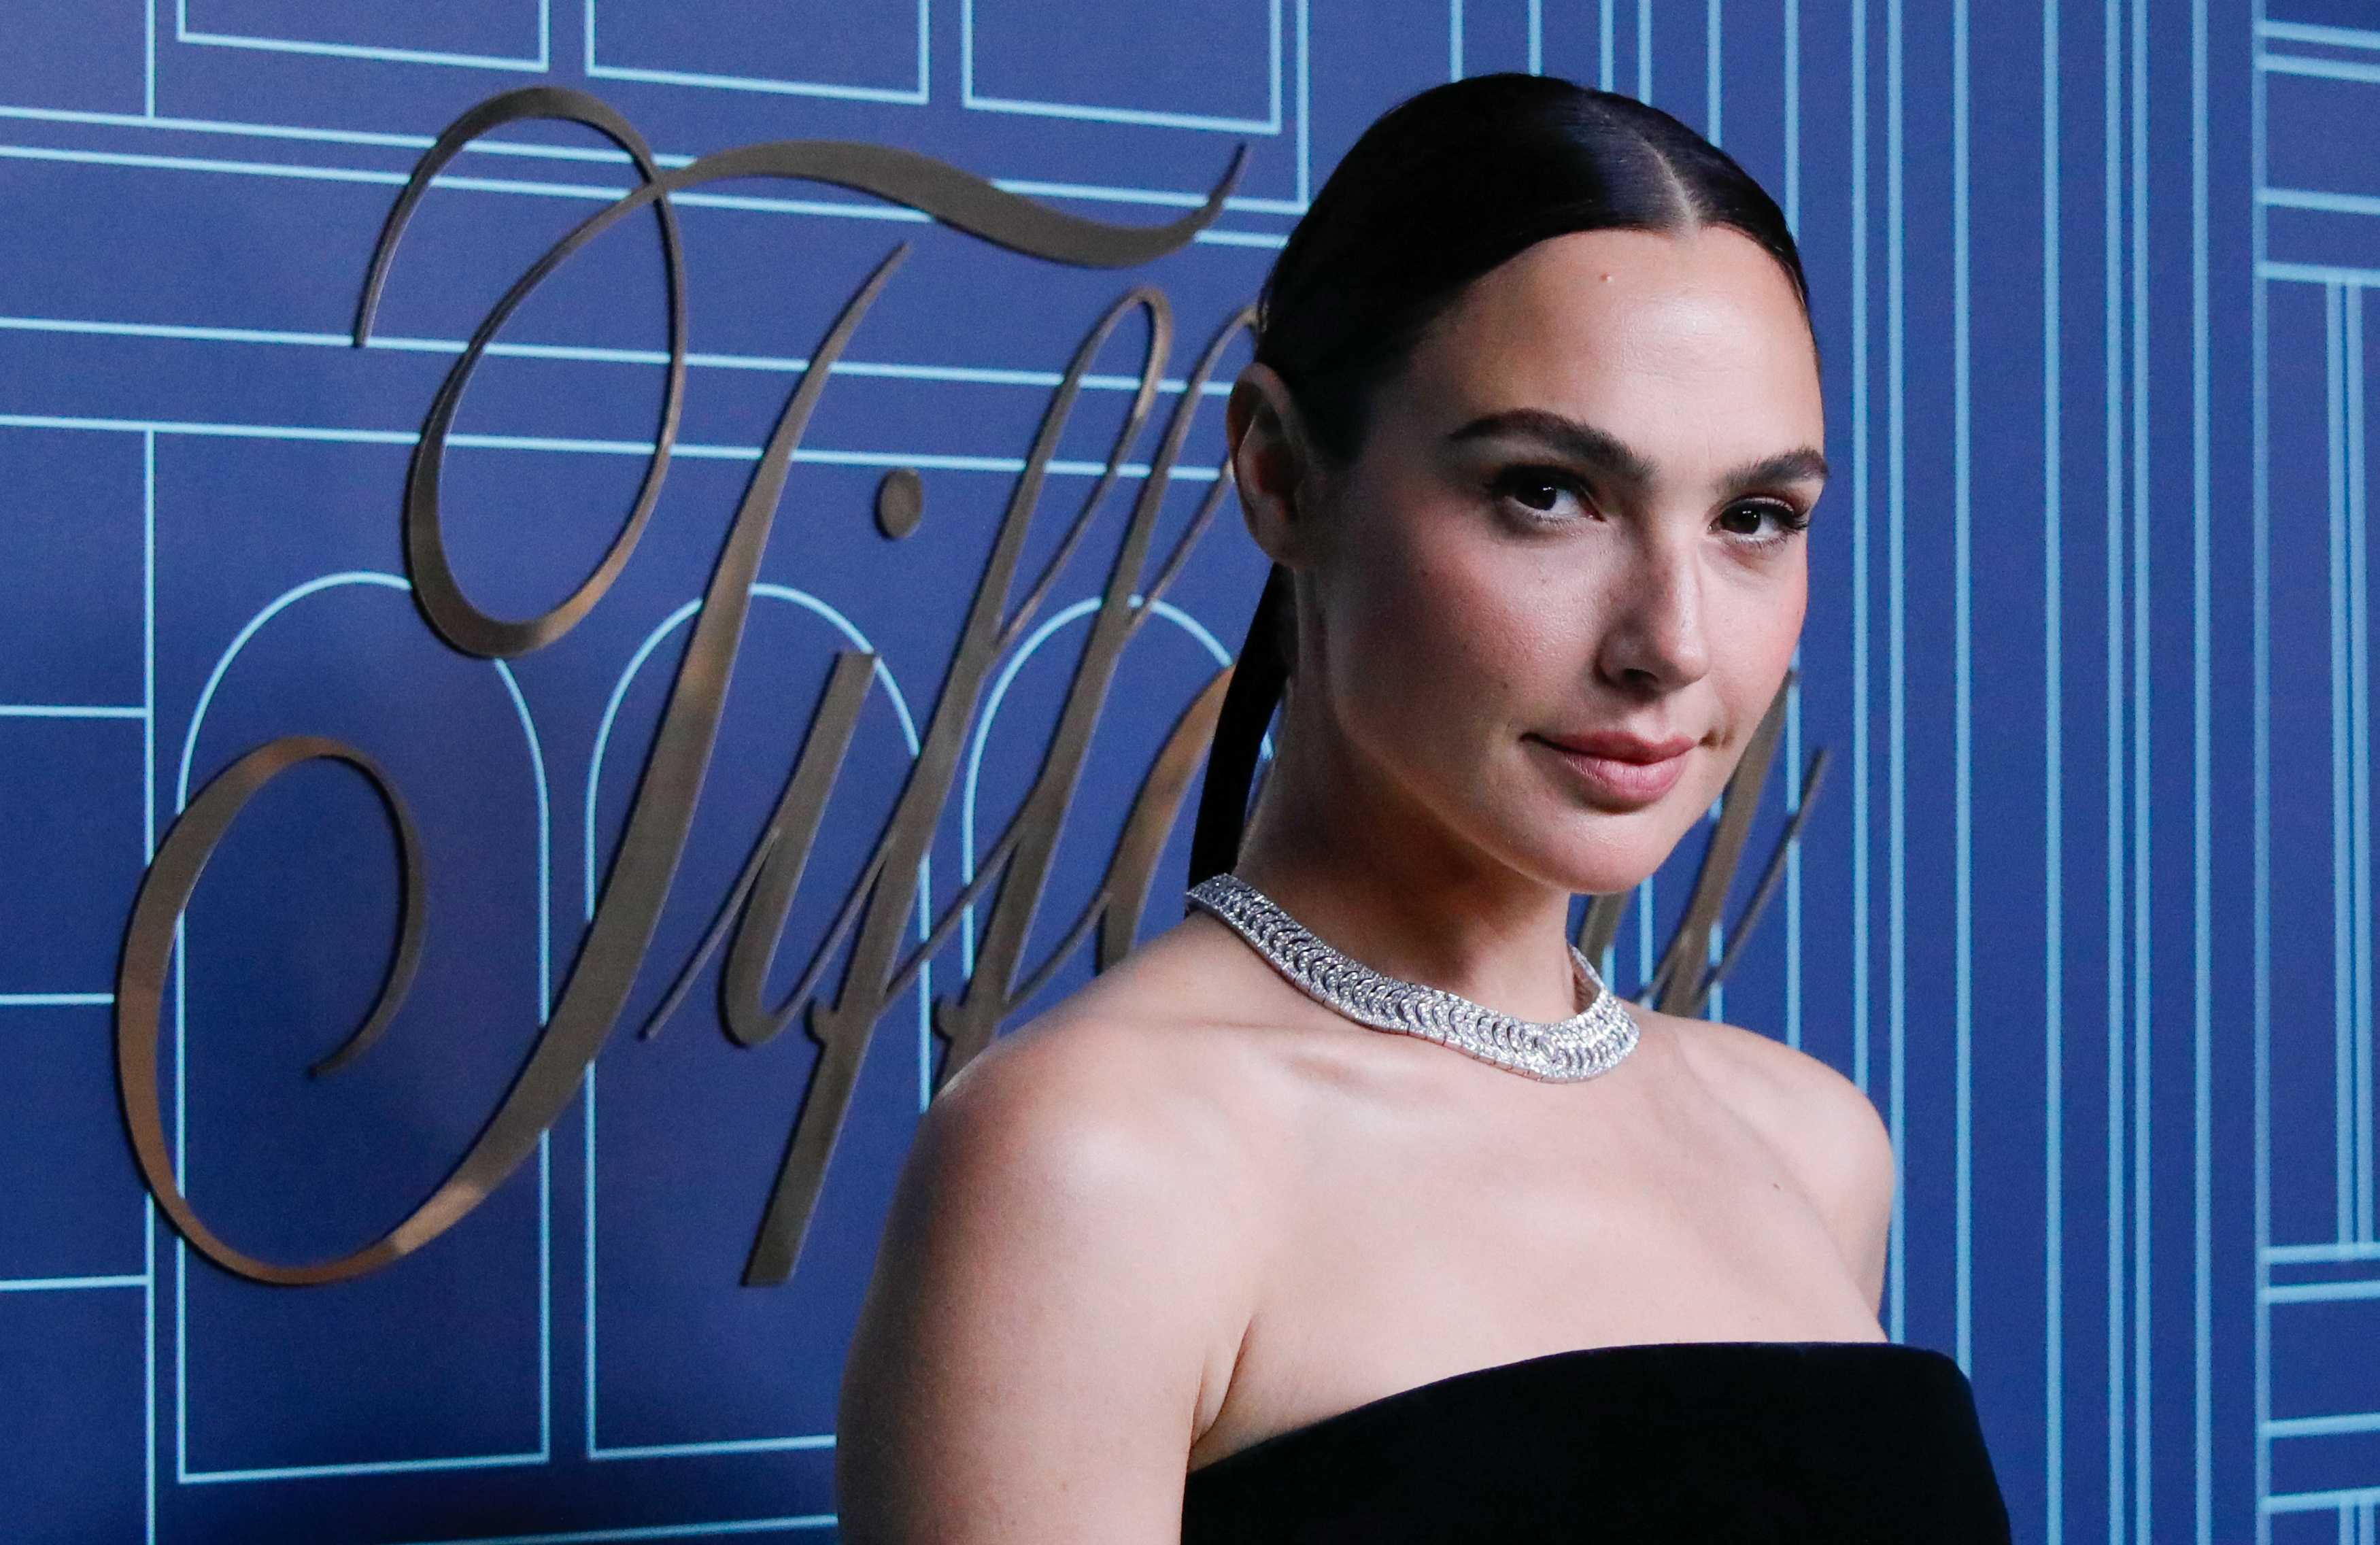 'Welcome to the house of girls': Gal Gadot welcomes arrival of fourth daughter